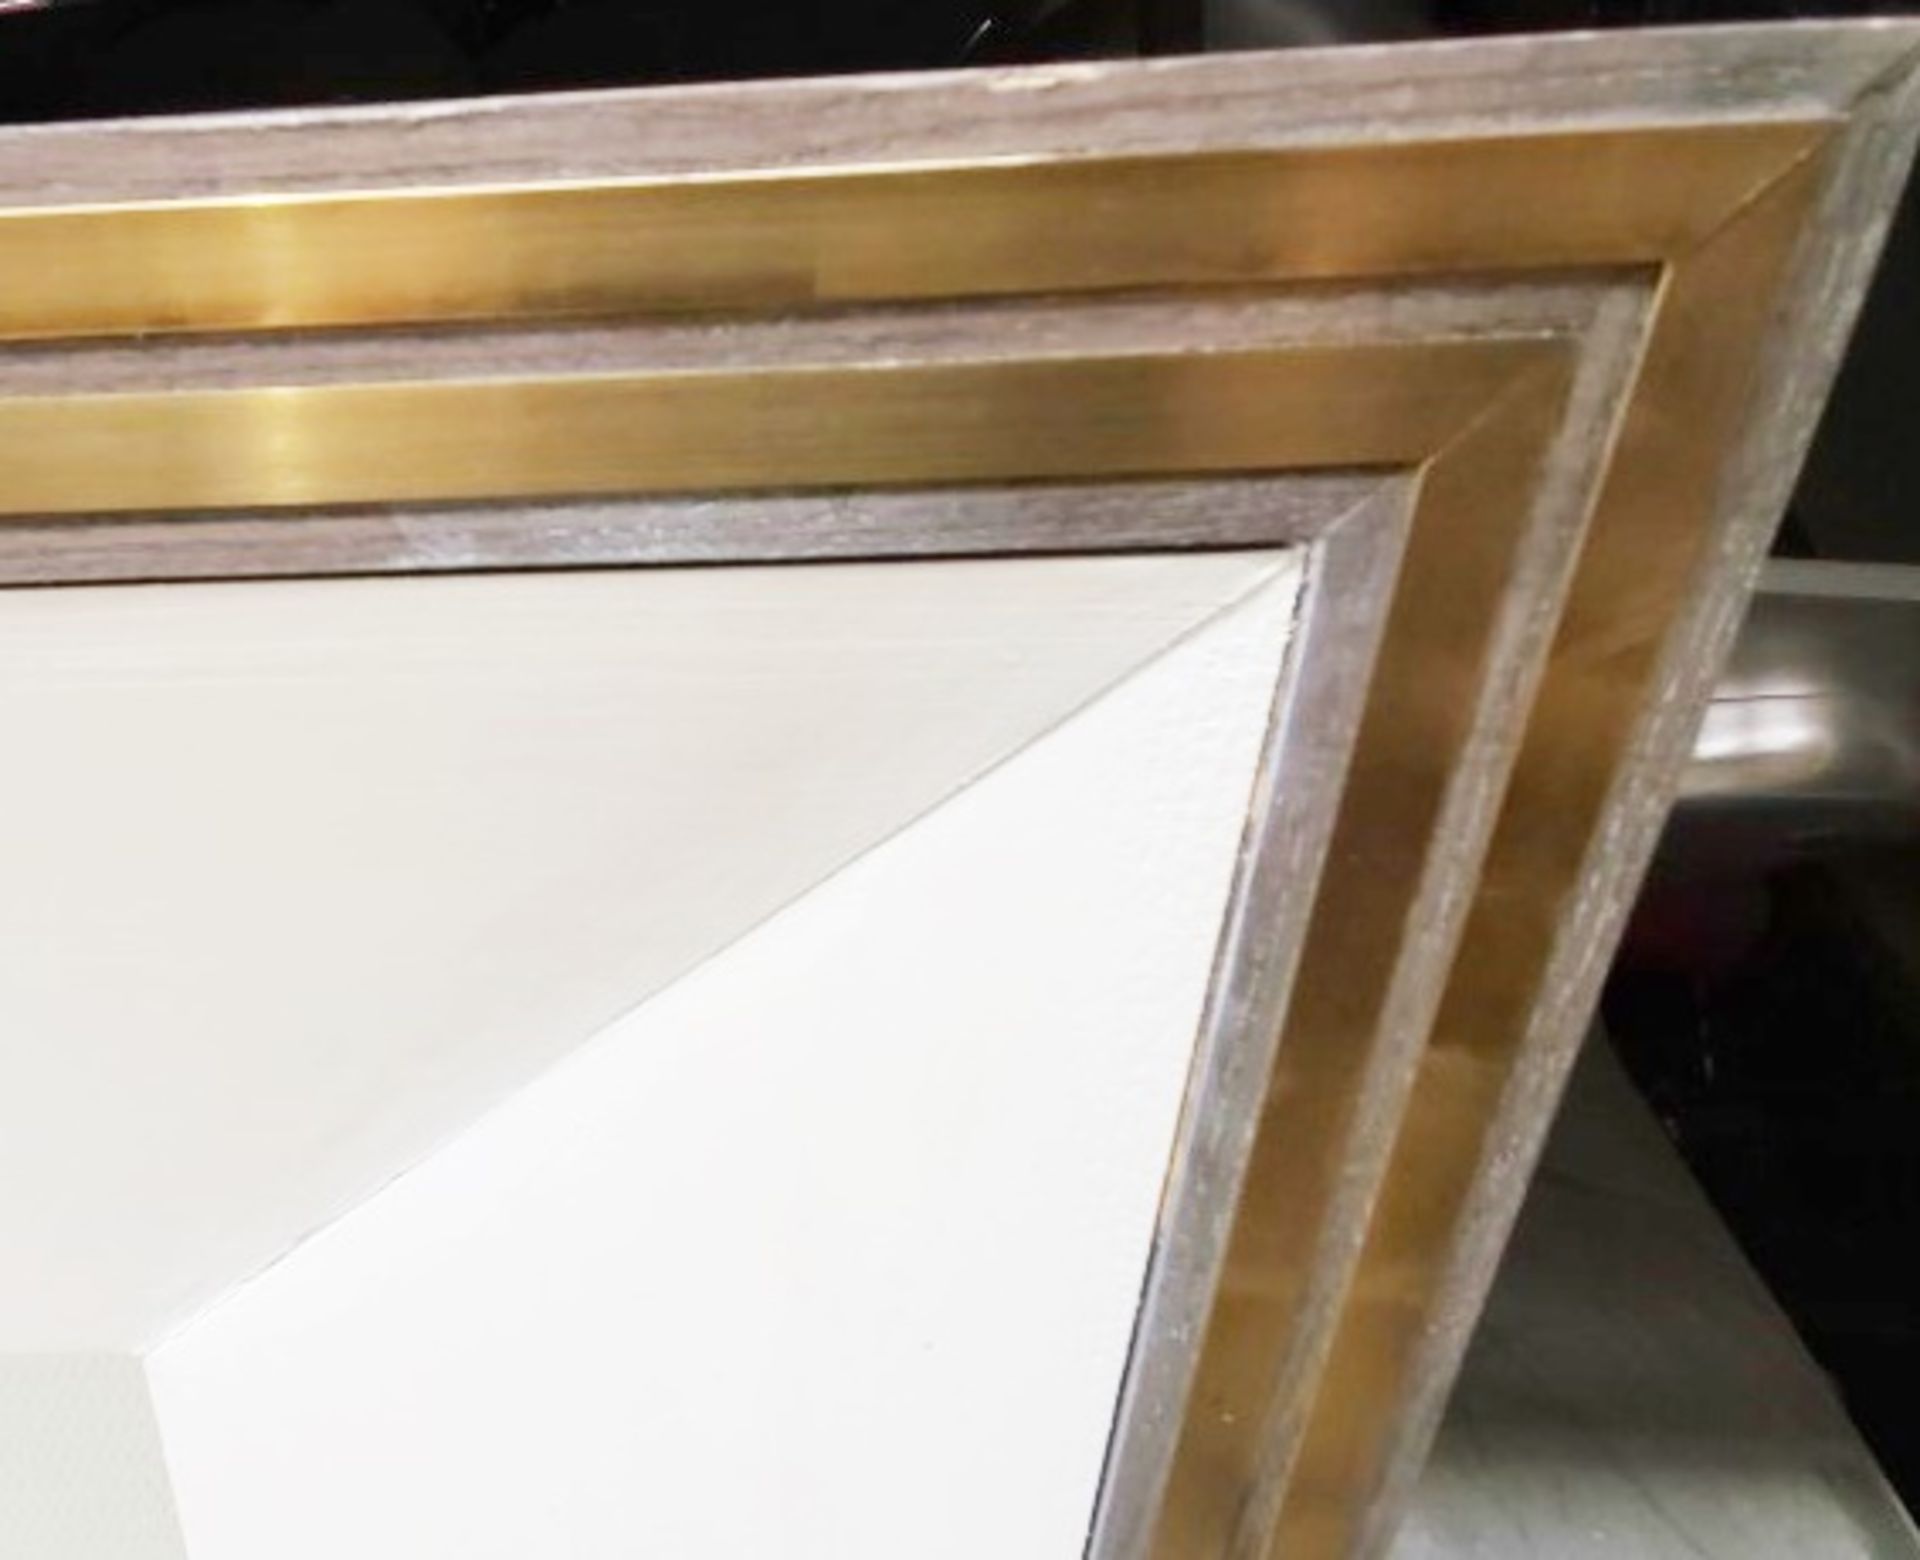 1 x Bespoke Bronze And 'Ash' Wood Mirror Surrounded By A Bevelled Off White Wood Frame 220x134cm - Image 3 of 8